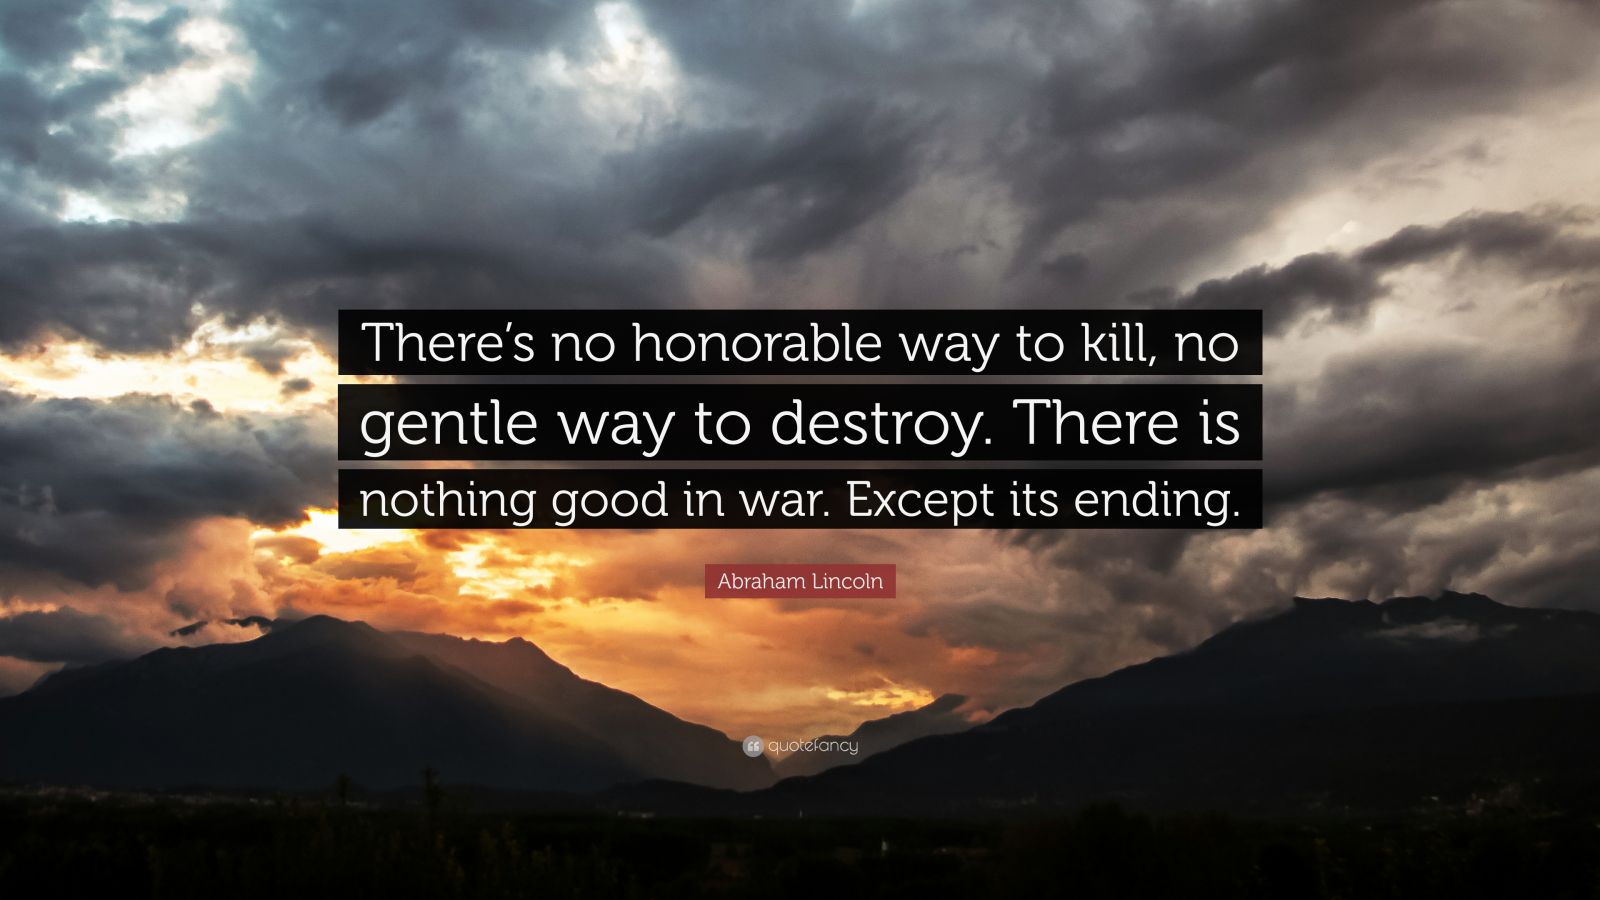 Abraham Lincoln Quote: “There’s no honorable way to kill, no gentle way